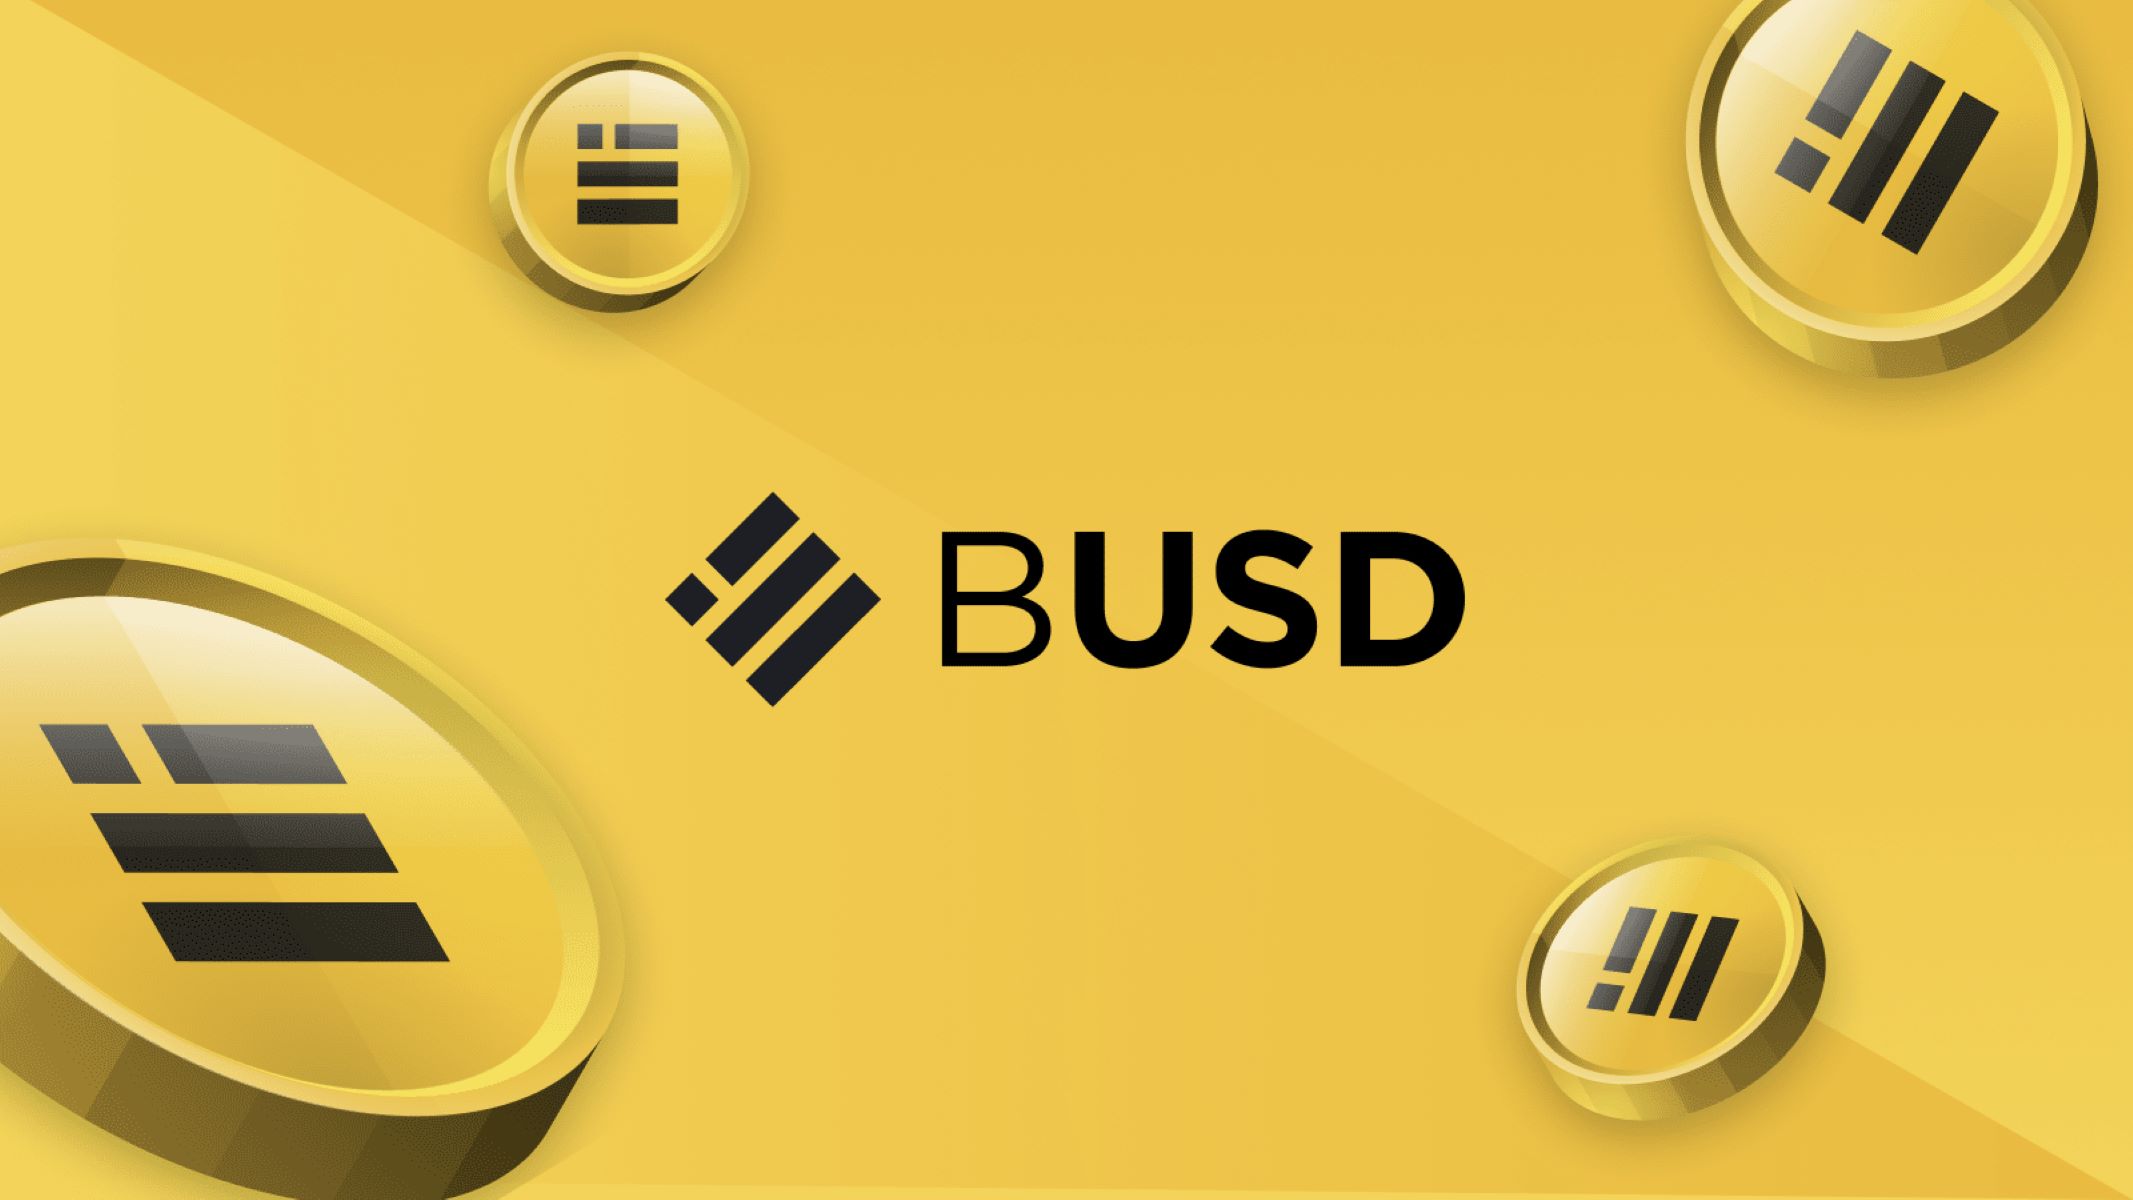 14-surprising-facts-about-binance-usd-busd